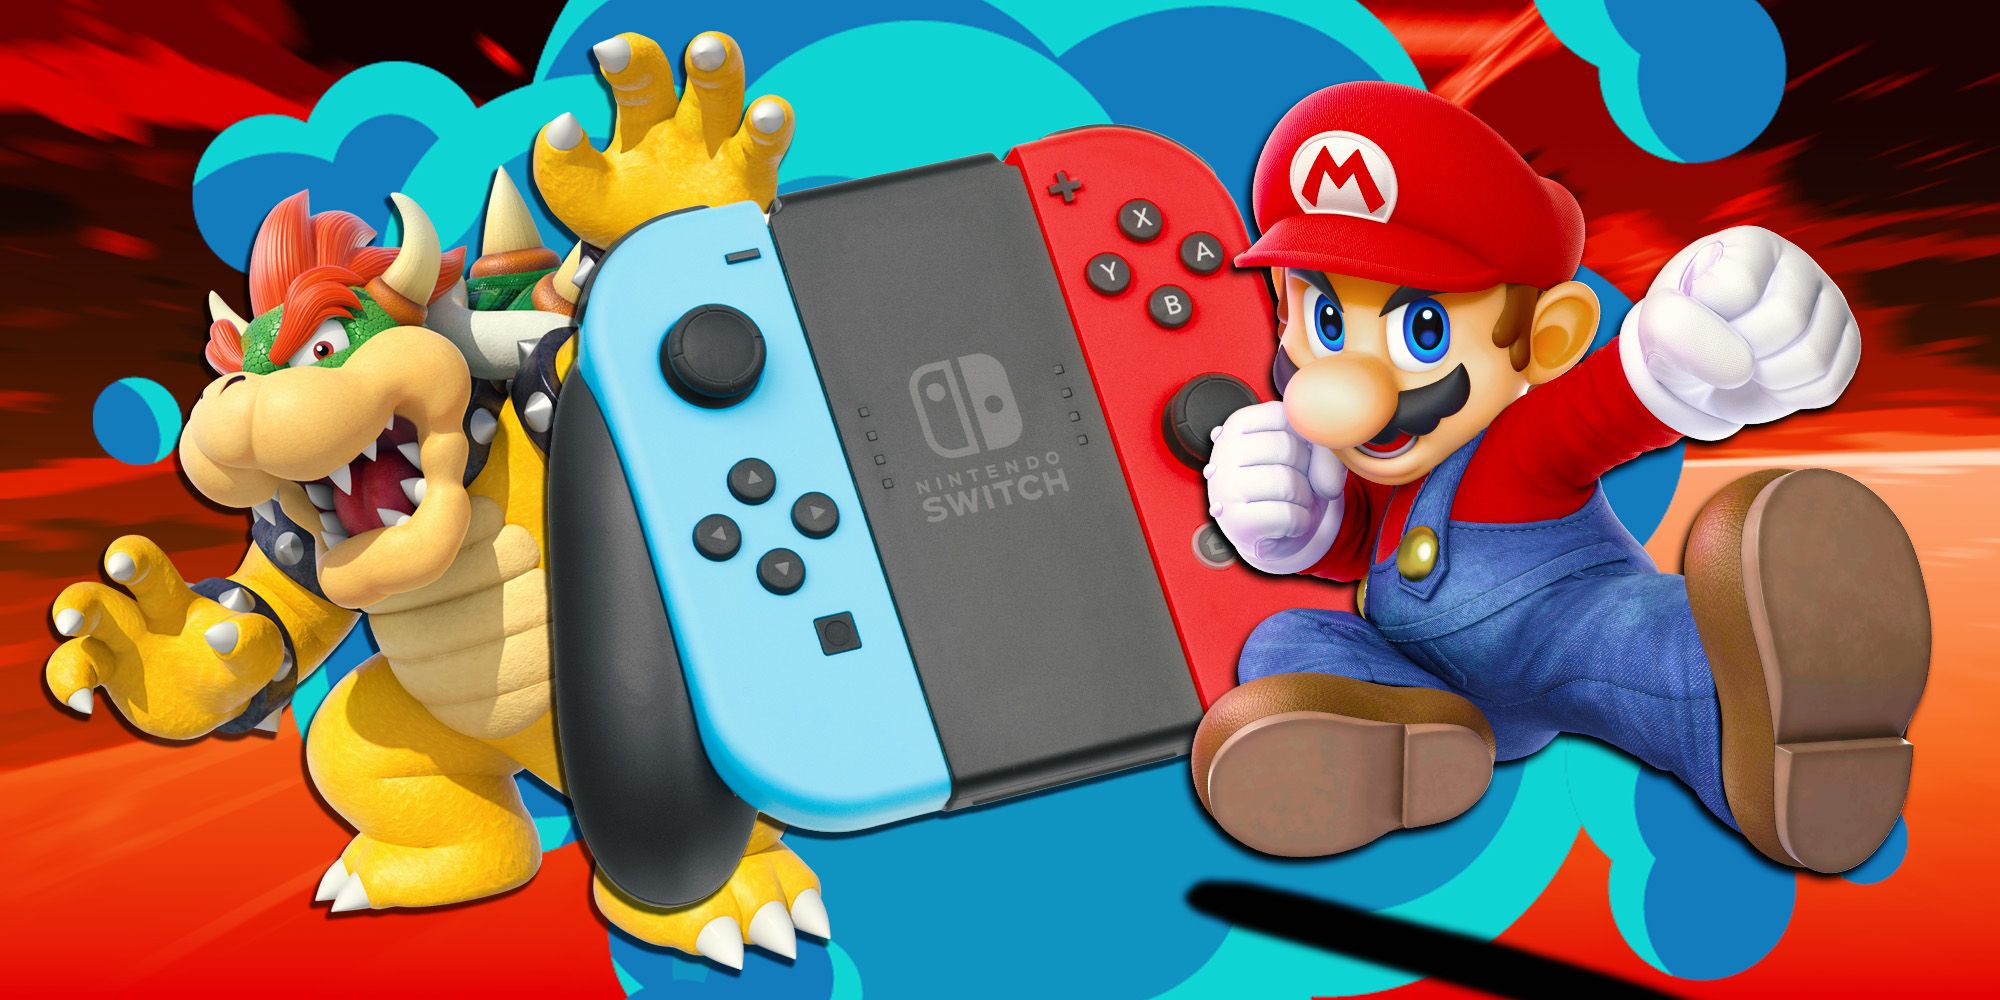 Nintendo Switch console with Mario and Bowser